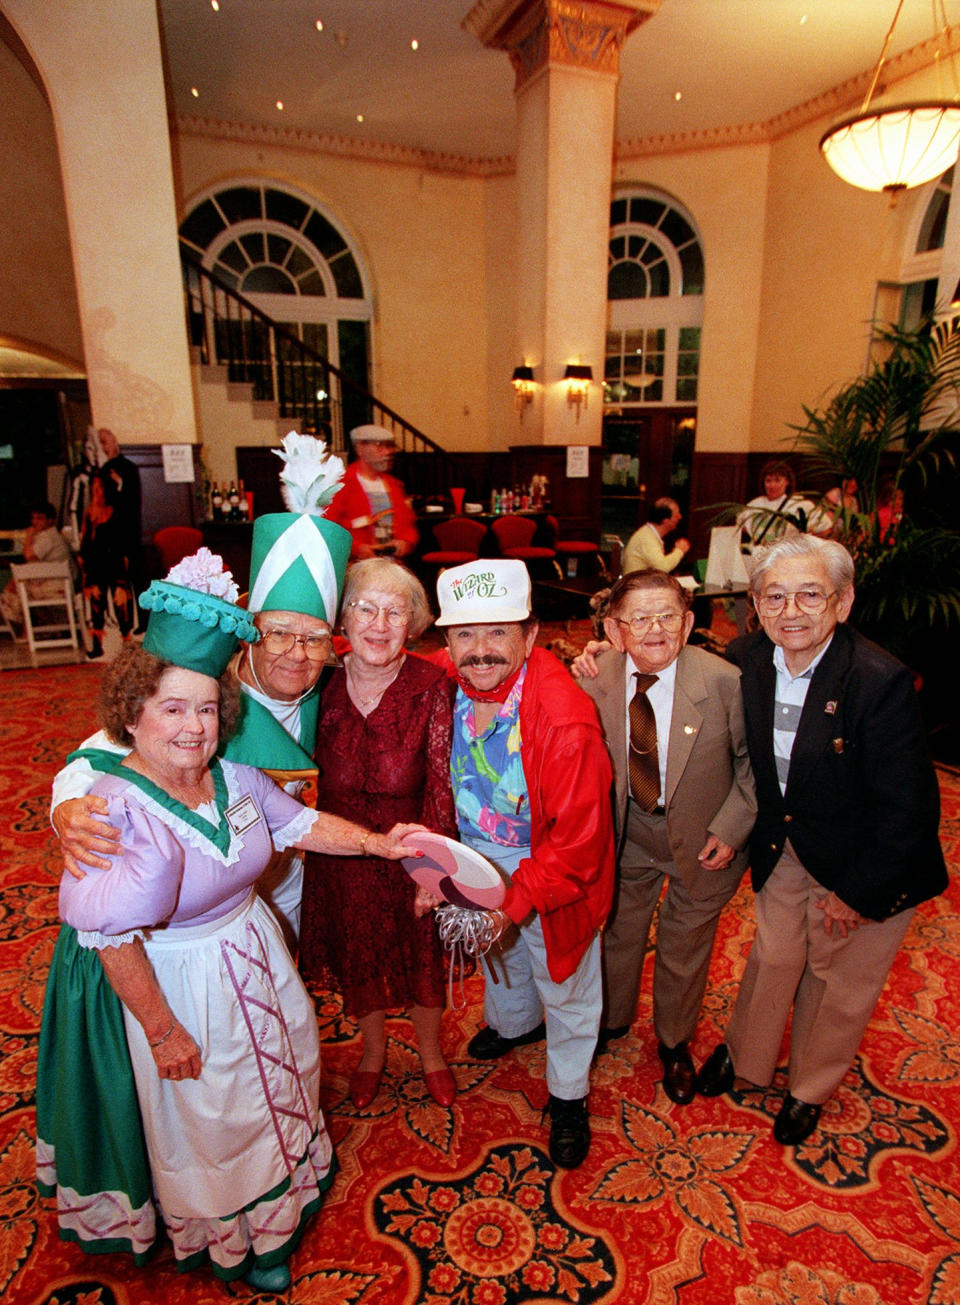 In this Oct. 30, 1997 file photo, cast members of the Munchkins from "The Wizard of Oz," from left, Margaret Pellegrini, Clarence Swensen, Ruth Duccini, Jerry Maren, Karl Slover, and Mickey Carroll pose in The Culver Hotel, in Culver City, Calif., where they stayed during the filming of the famed movie. Ruth Robinson Duccini, one of the original Munchkins from the 1939 legendary movie, has died, Thursday, Jan. 16, 2014. She was 95. (AP Photo/Mark J. Terrill, File)